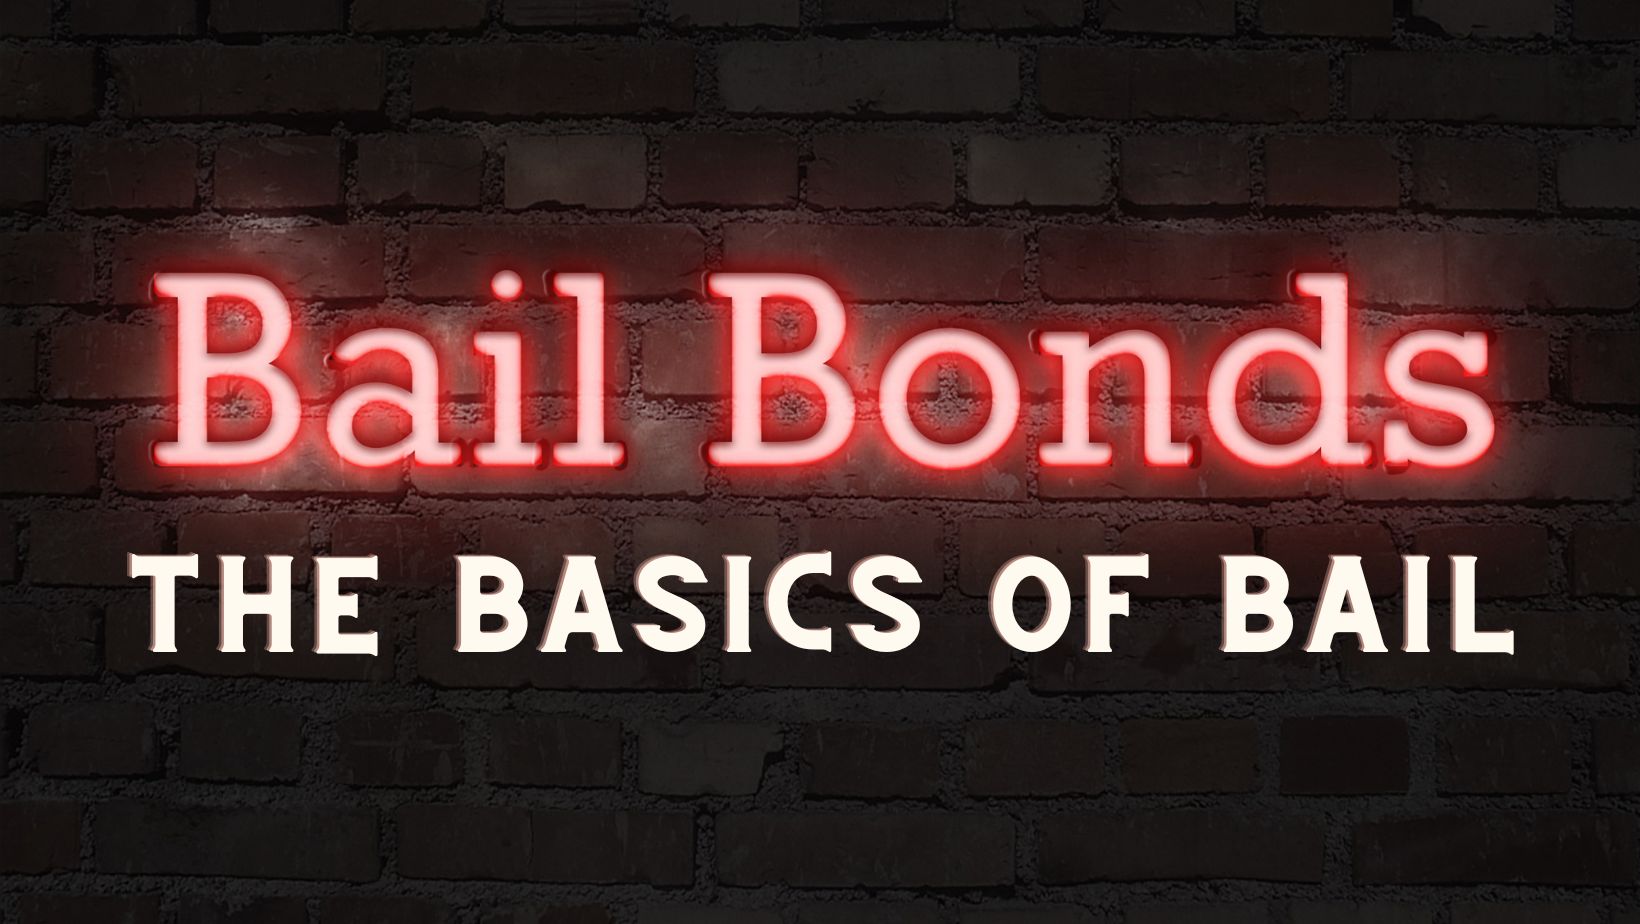 Bail Bonds information from Witt Law Group.